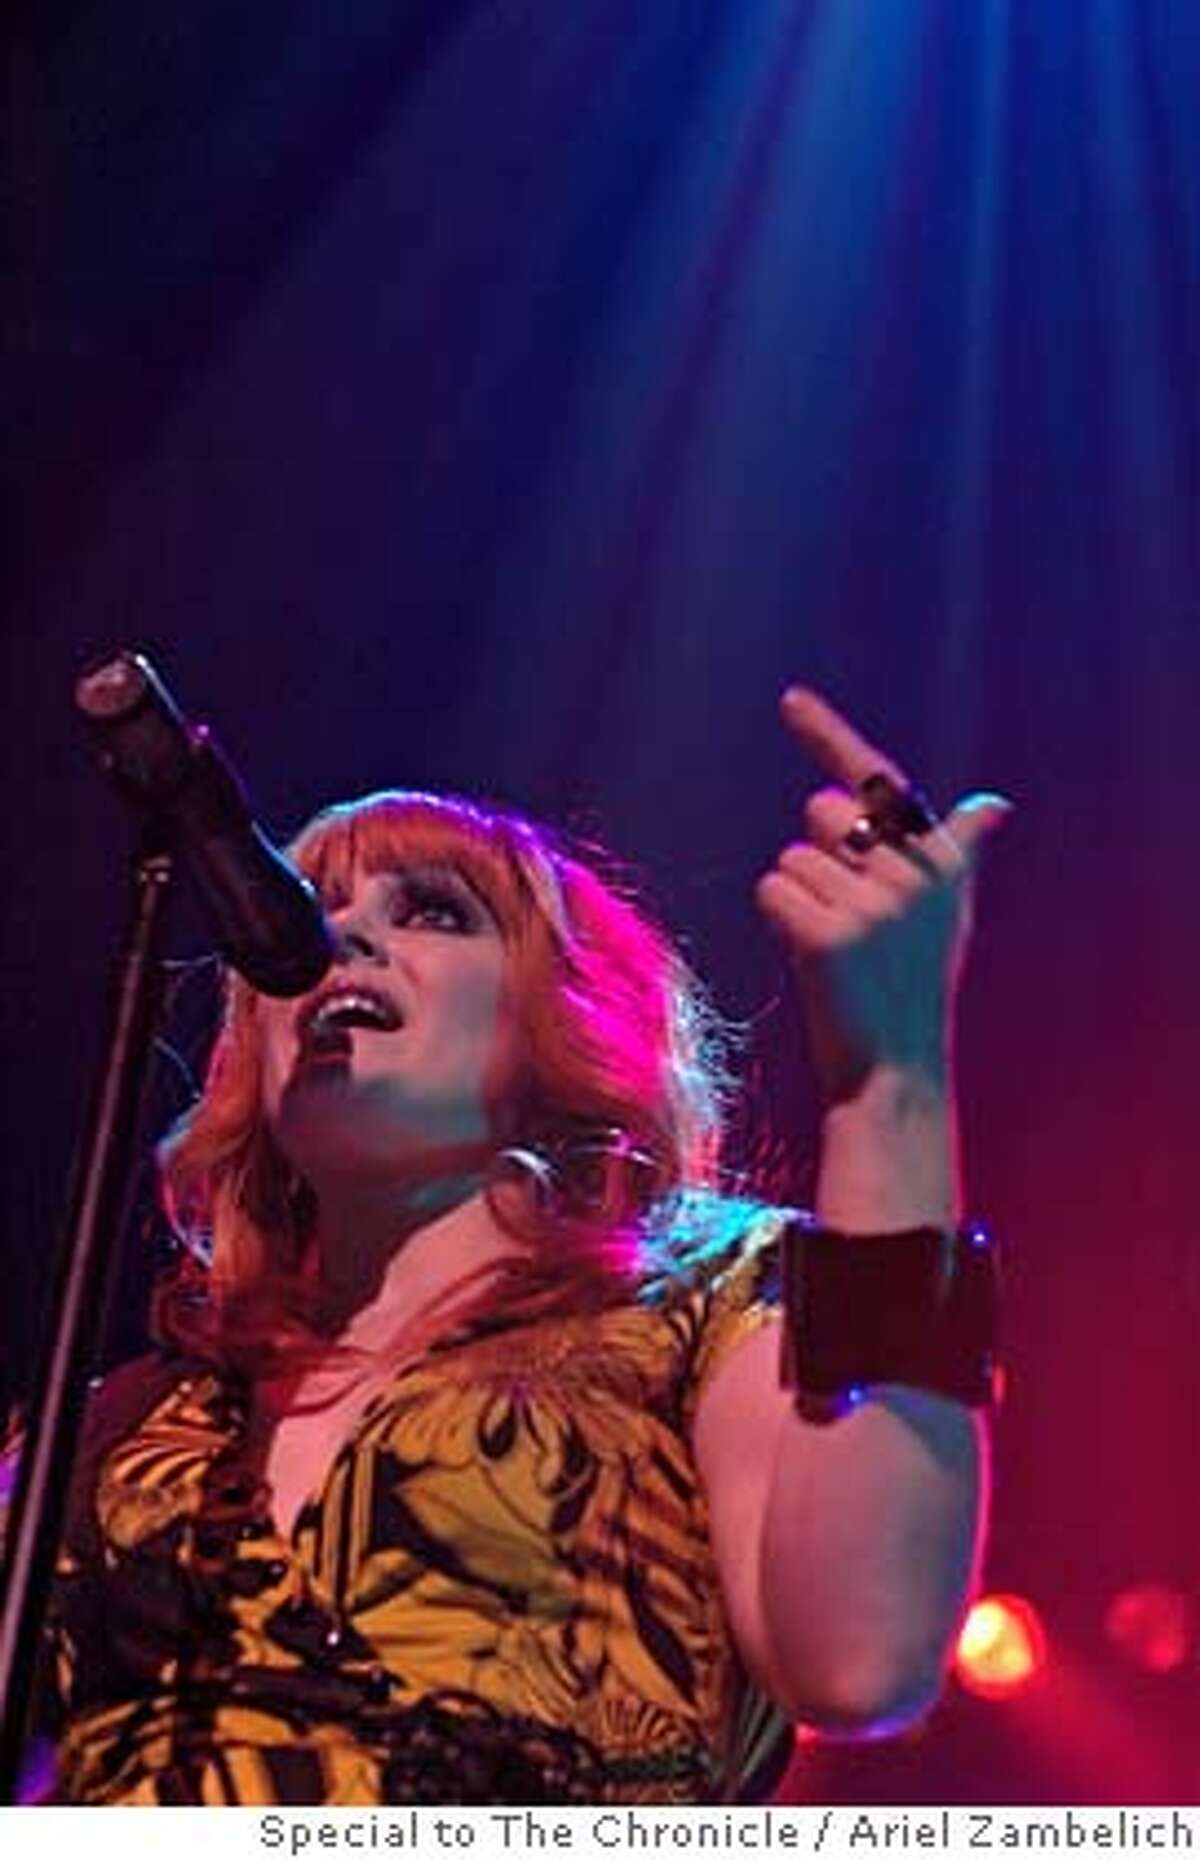 SCISSOR02_031_AZ.JPG Scissor Sisters singer Ana Matronic during the band's show on Friday at the Warfield. Photo by ARIEL ZAMBELICH/Special to The San Francisco Chronicle Photo taken on 9/29/06, in SAN FRANCISCO, CALIFORNIA, USA **All names cq (source)